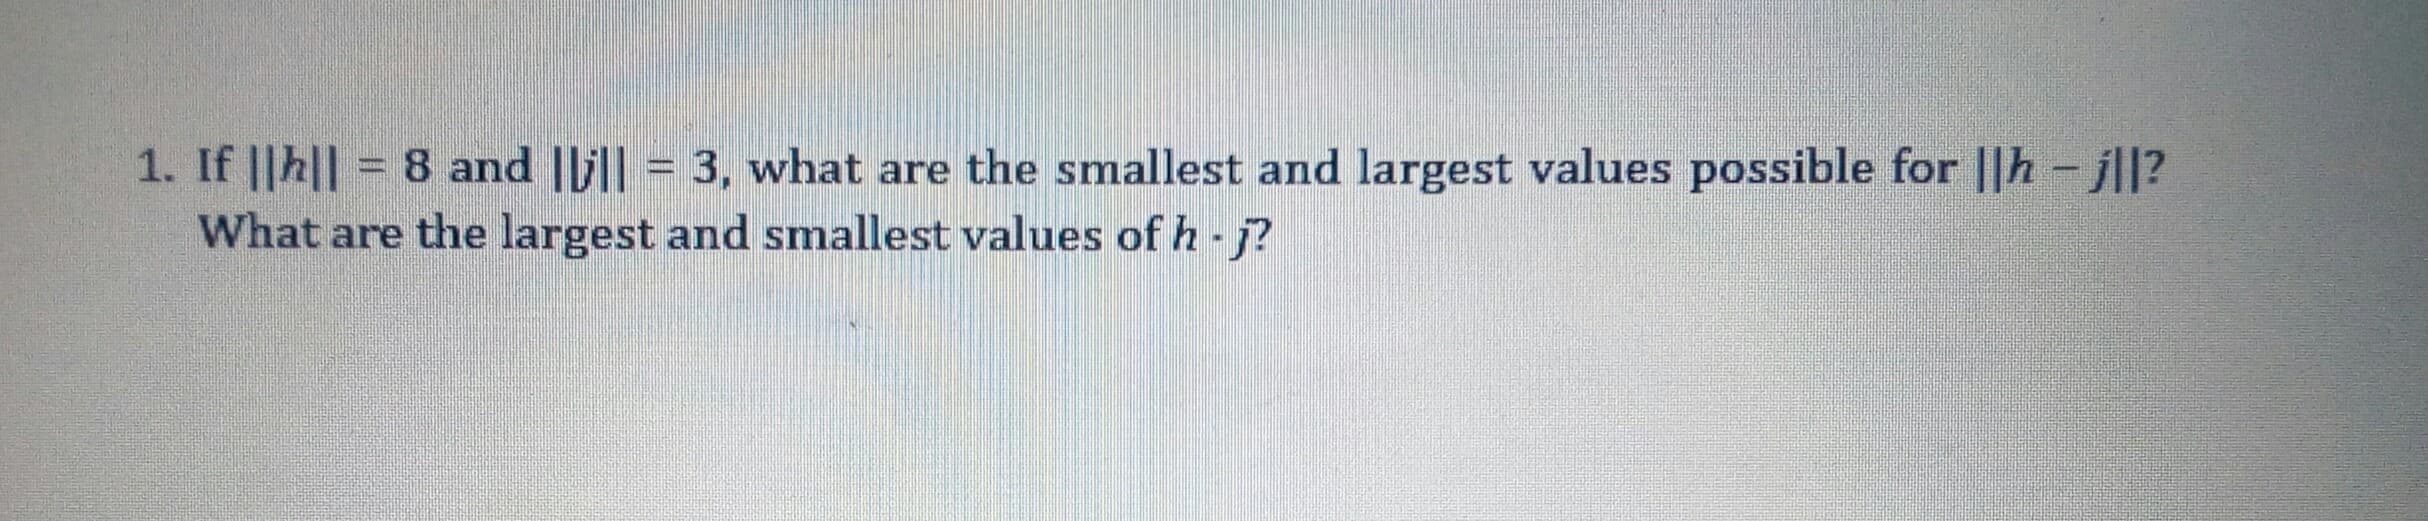 If ||h|| = 8 and |lil| = 3, what are the smallest and largest values possible for ||h- jll?
What are the largest and smallest values of h - j?
